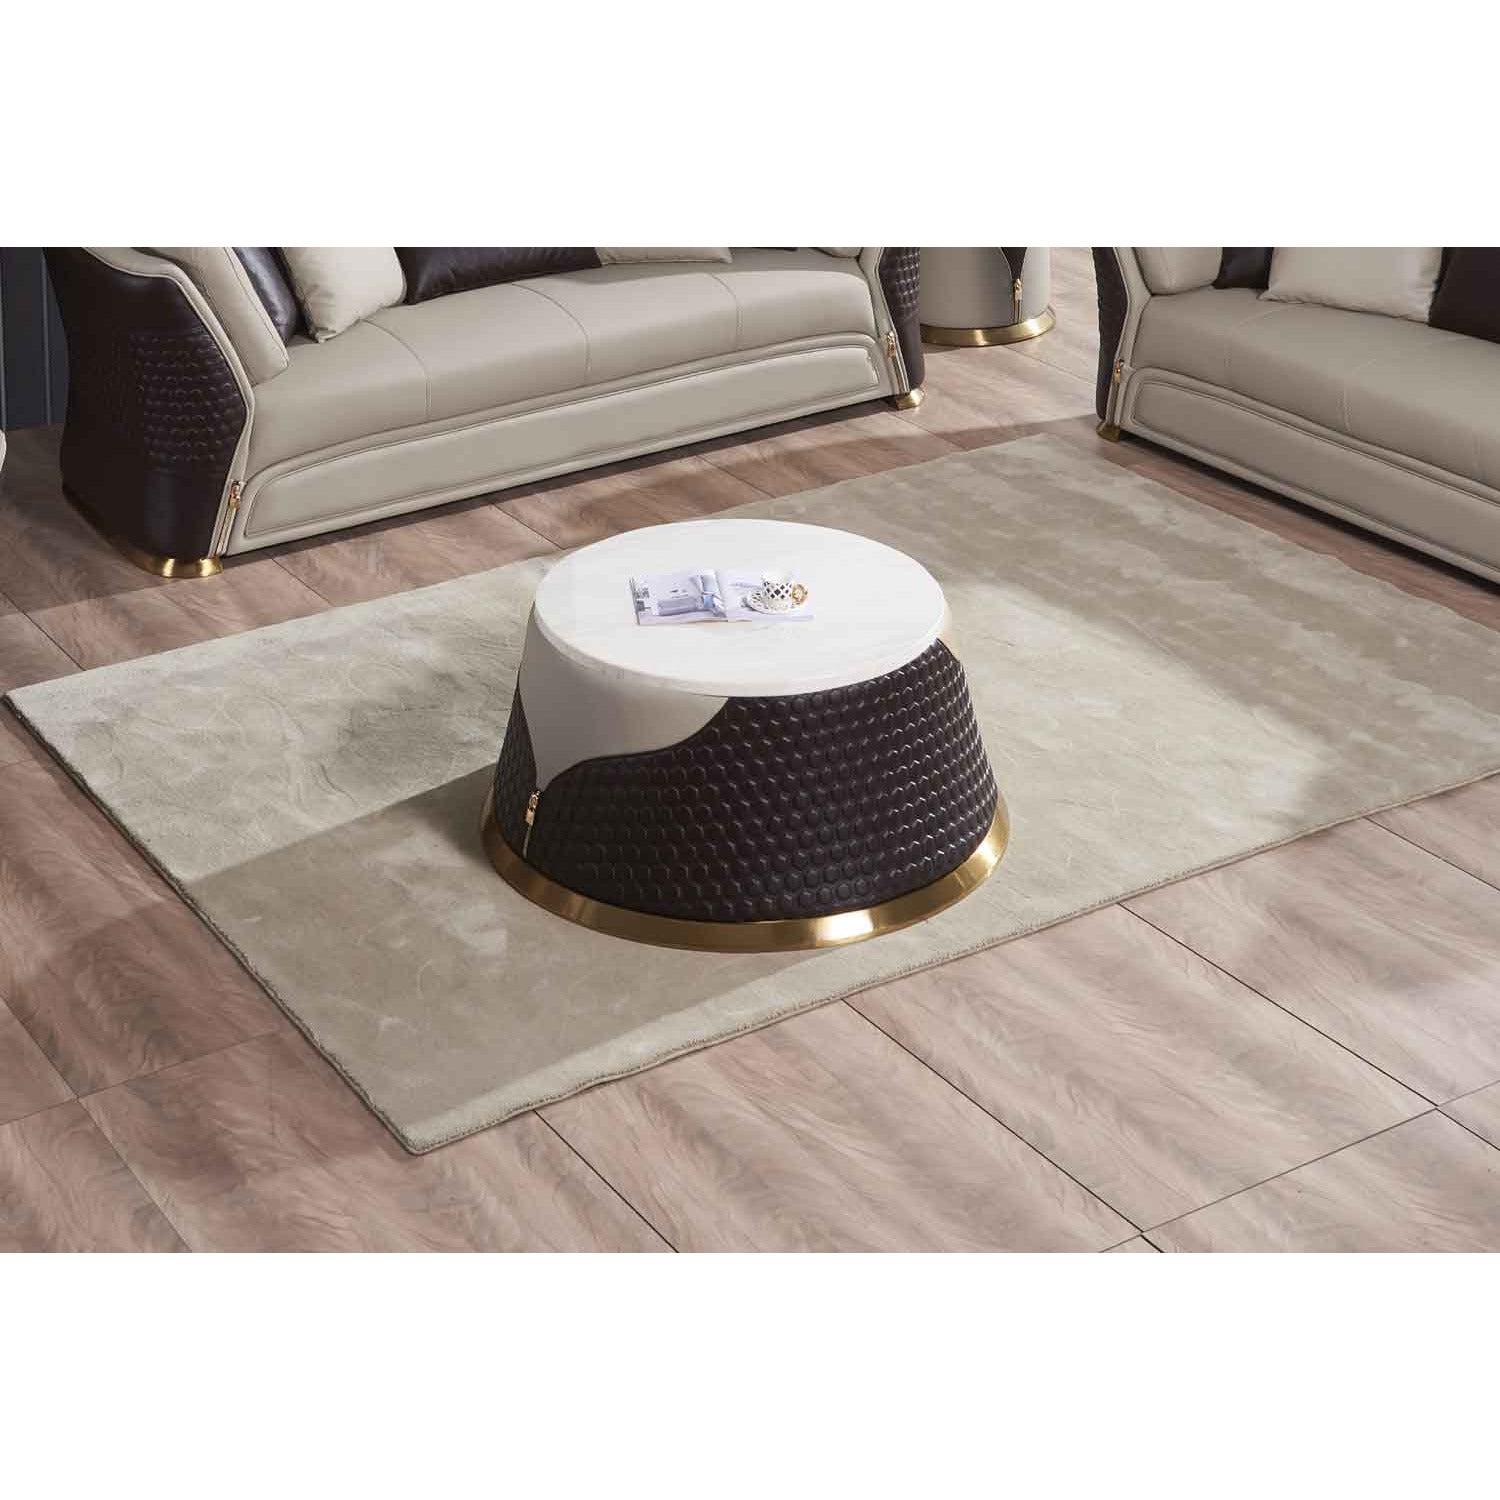 European Furniture - Vogue Coffee Table in Beige-Chocolate - 27990-CT - New Star Living